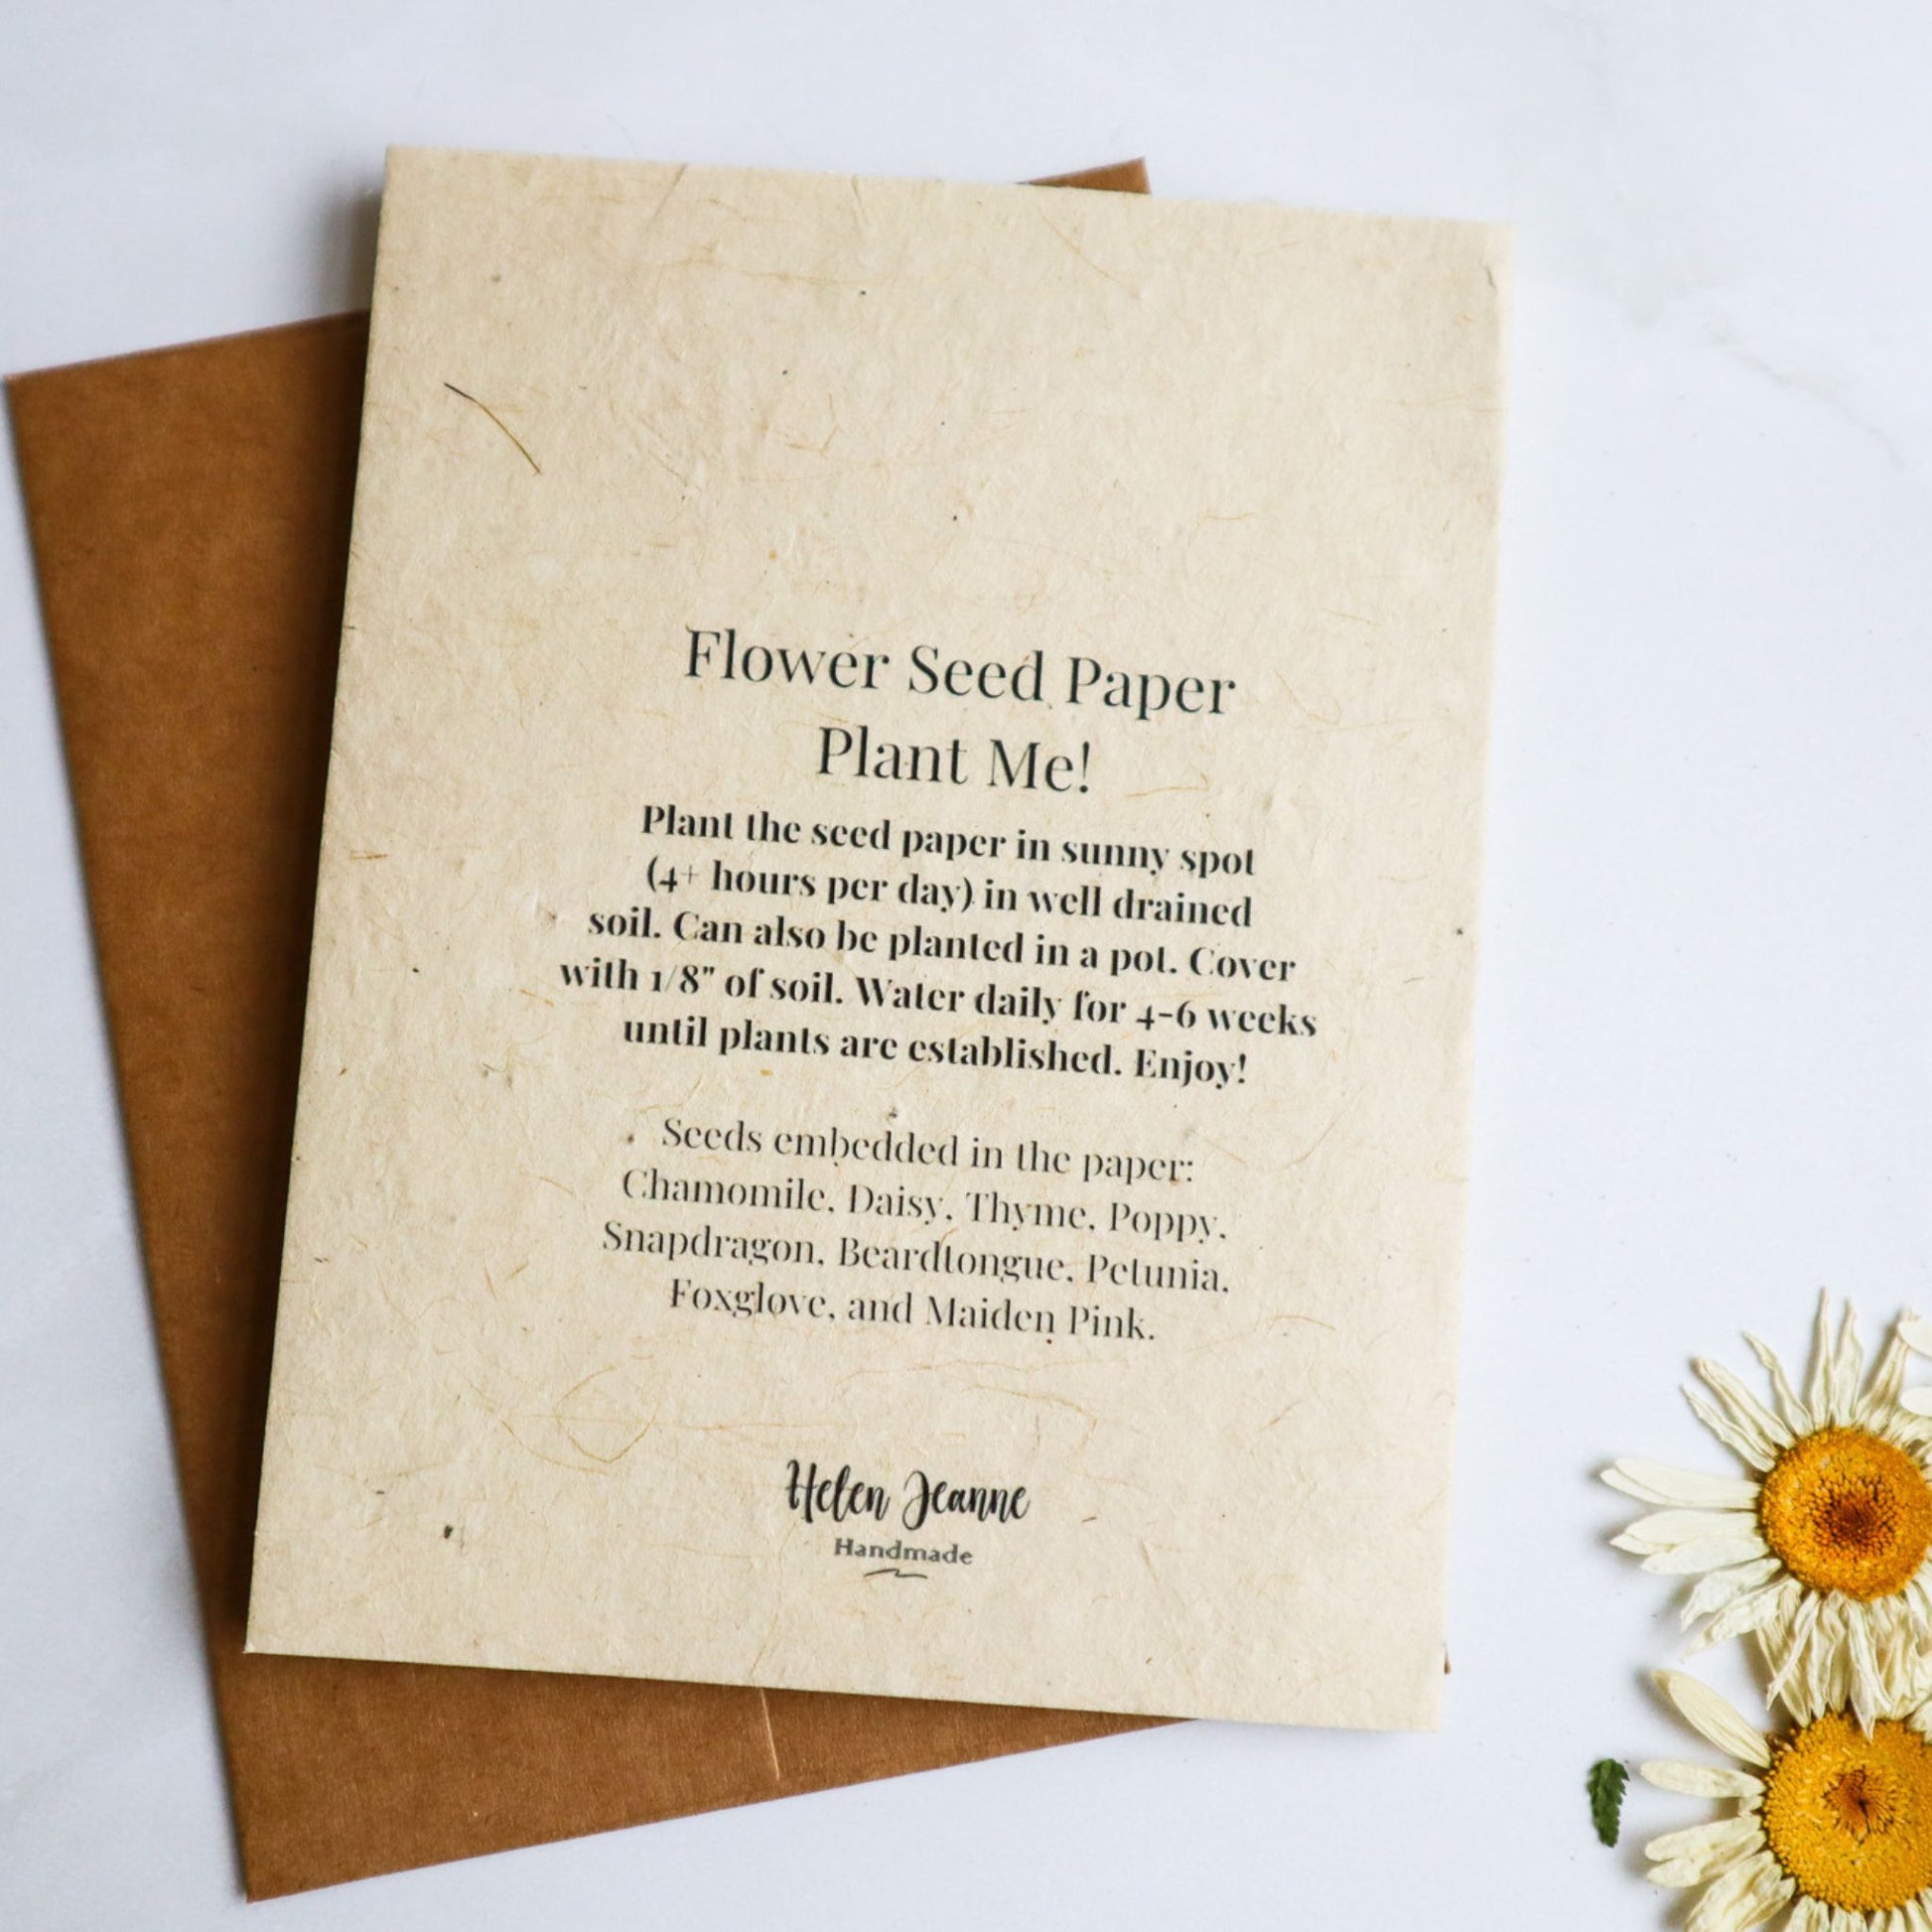 Plant Me! Biodegradable Flower Seed Paper